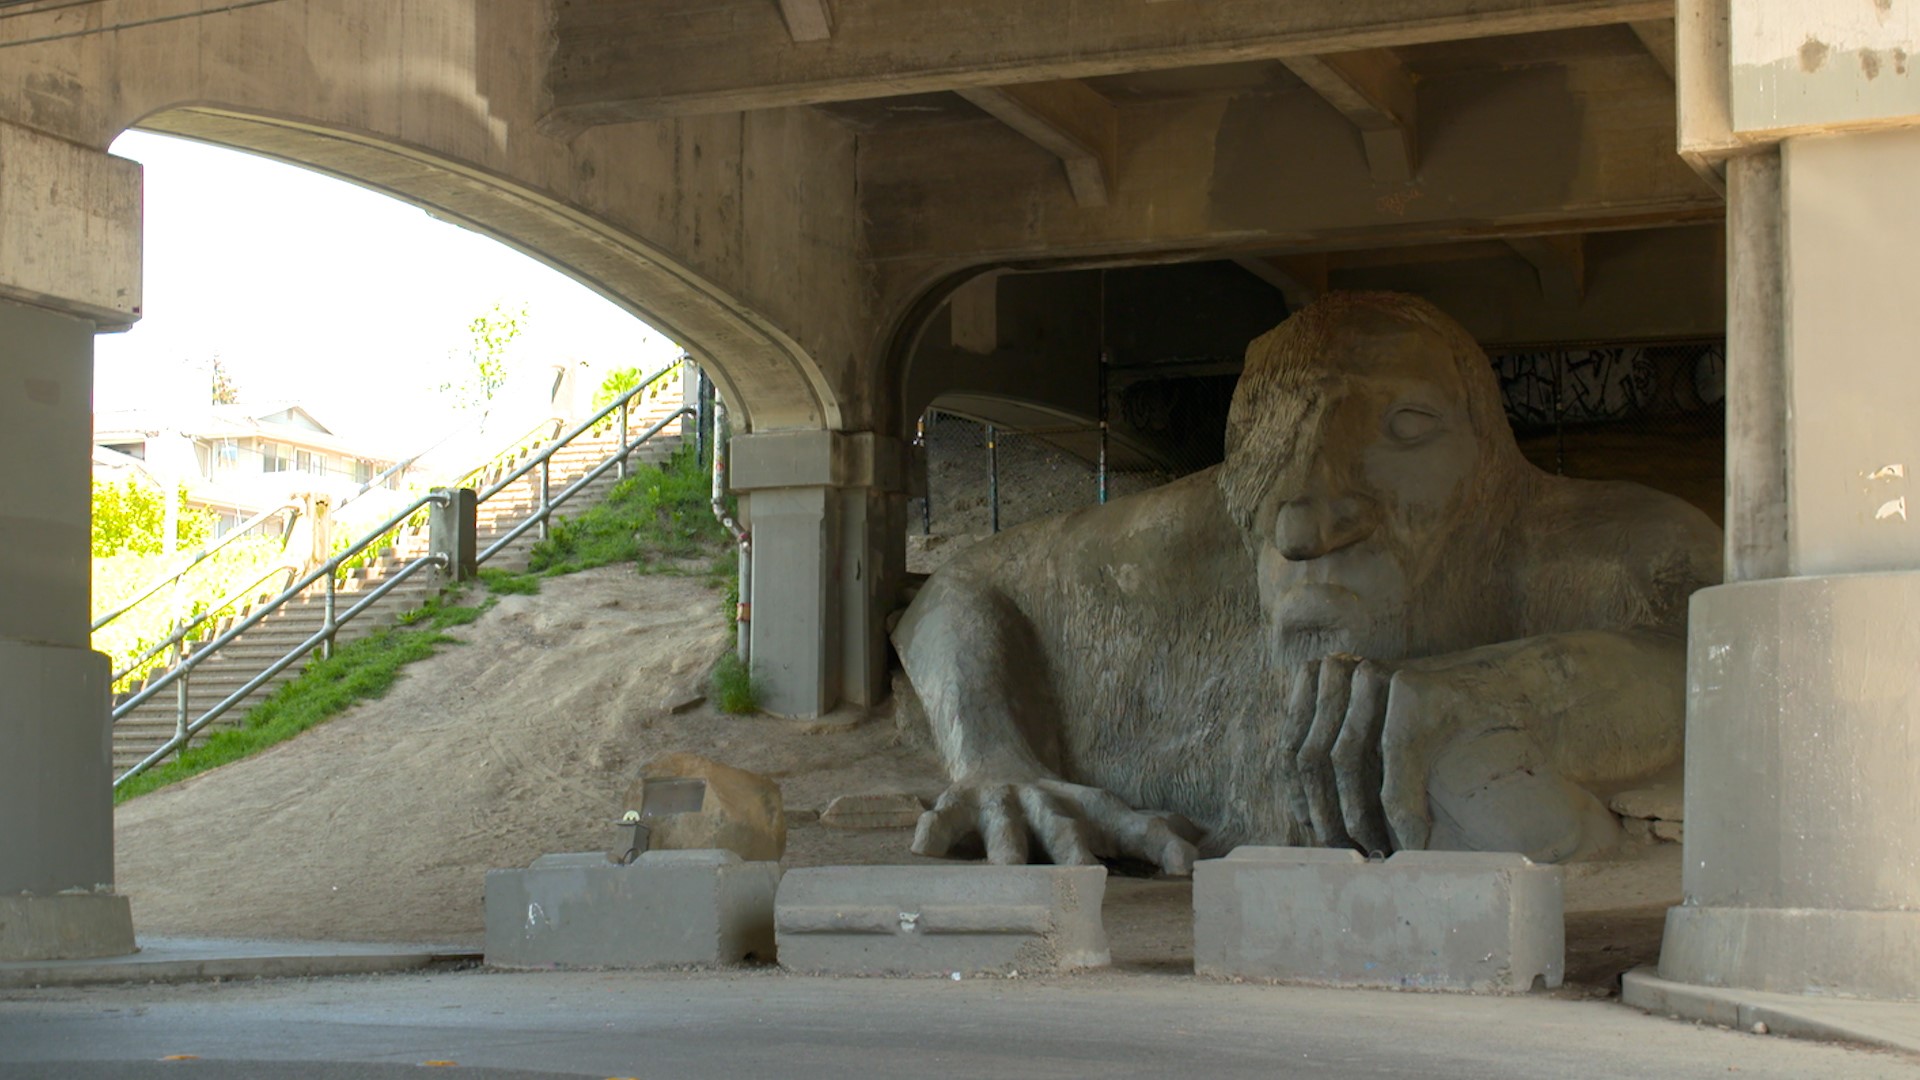 The troll was a collaboration between four artists as a public art project for the neighborhood. It is 2023's winner for Best Weird Wonder.